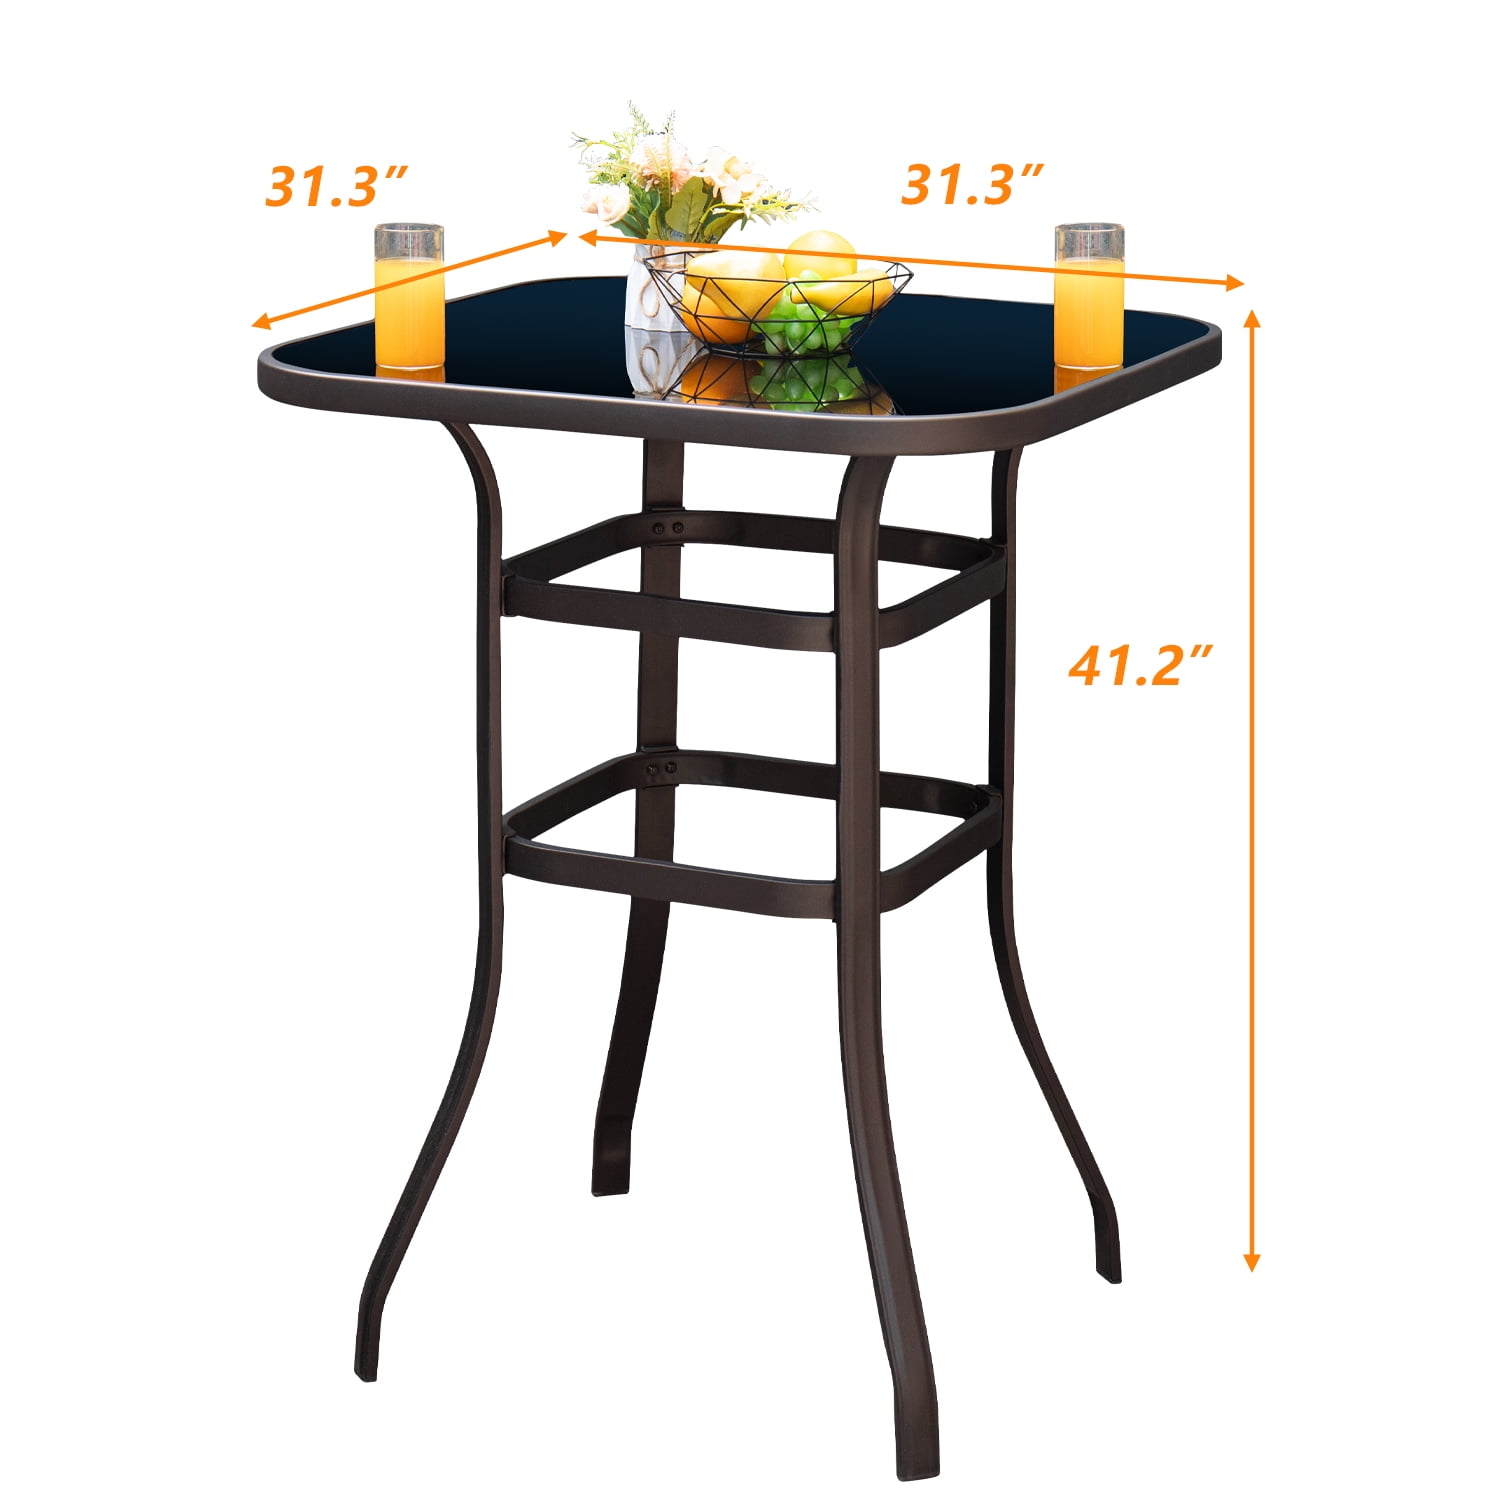 VEVOR Outdoor Bar Table, 38.6 inchl x 15 inchw x 38.6 inchh, Narrow Rectangular Bar Height Pub Table, Sturdy Metal Frame Tall Table Counter with